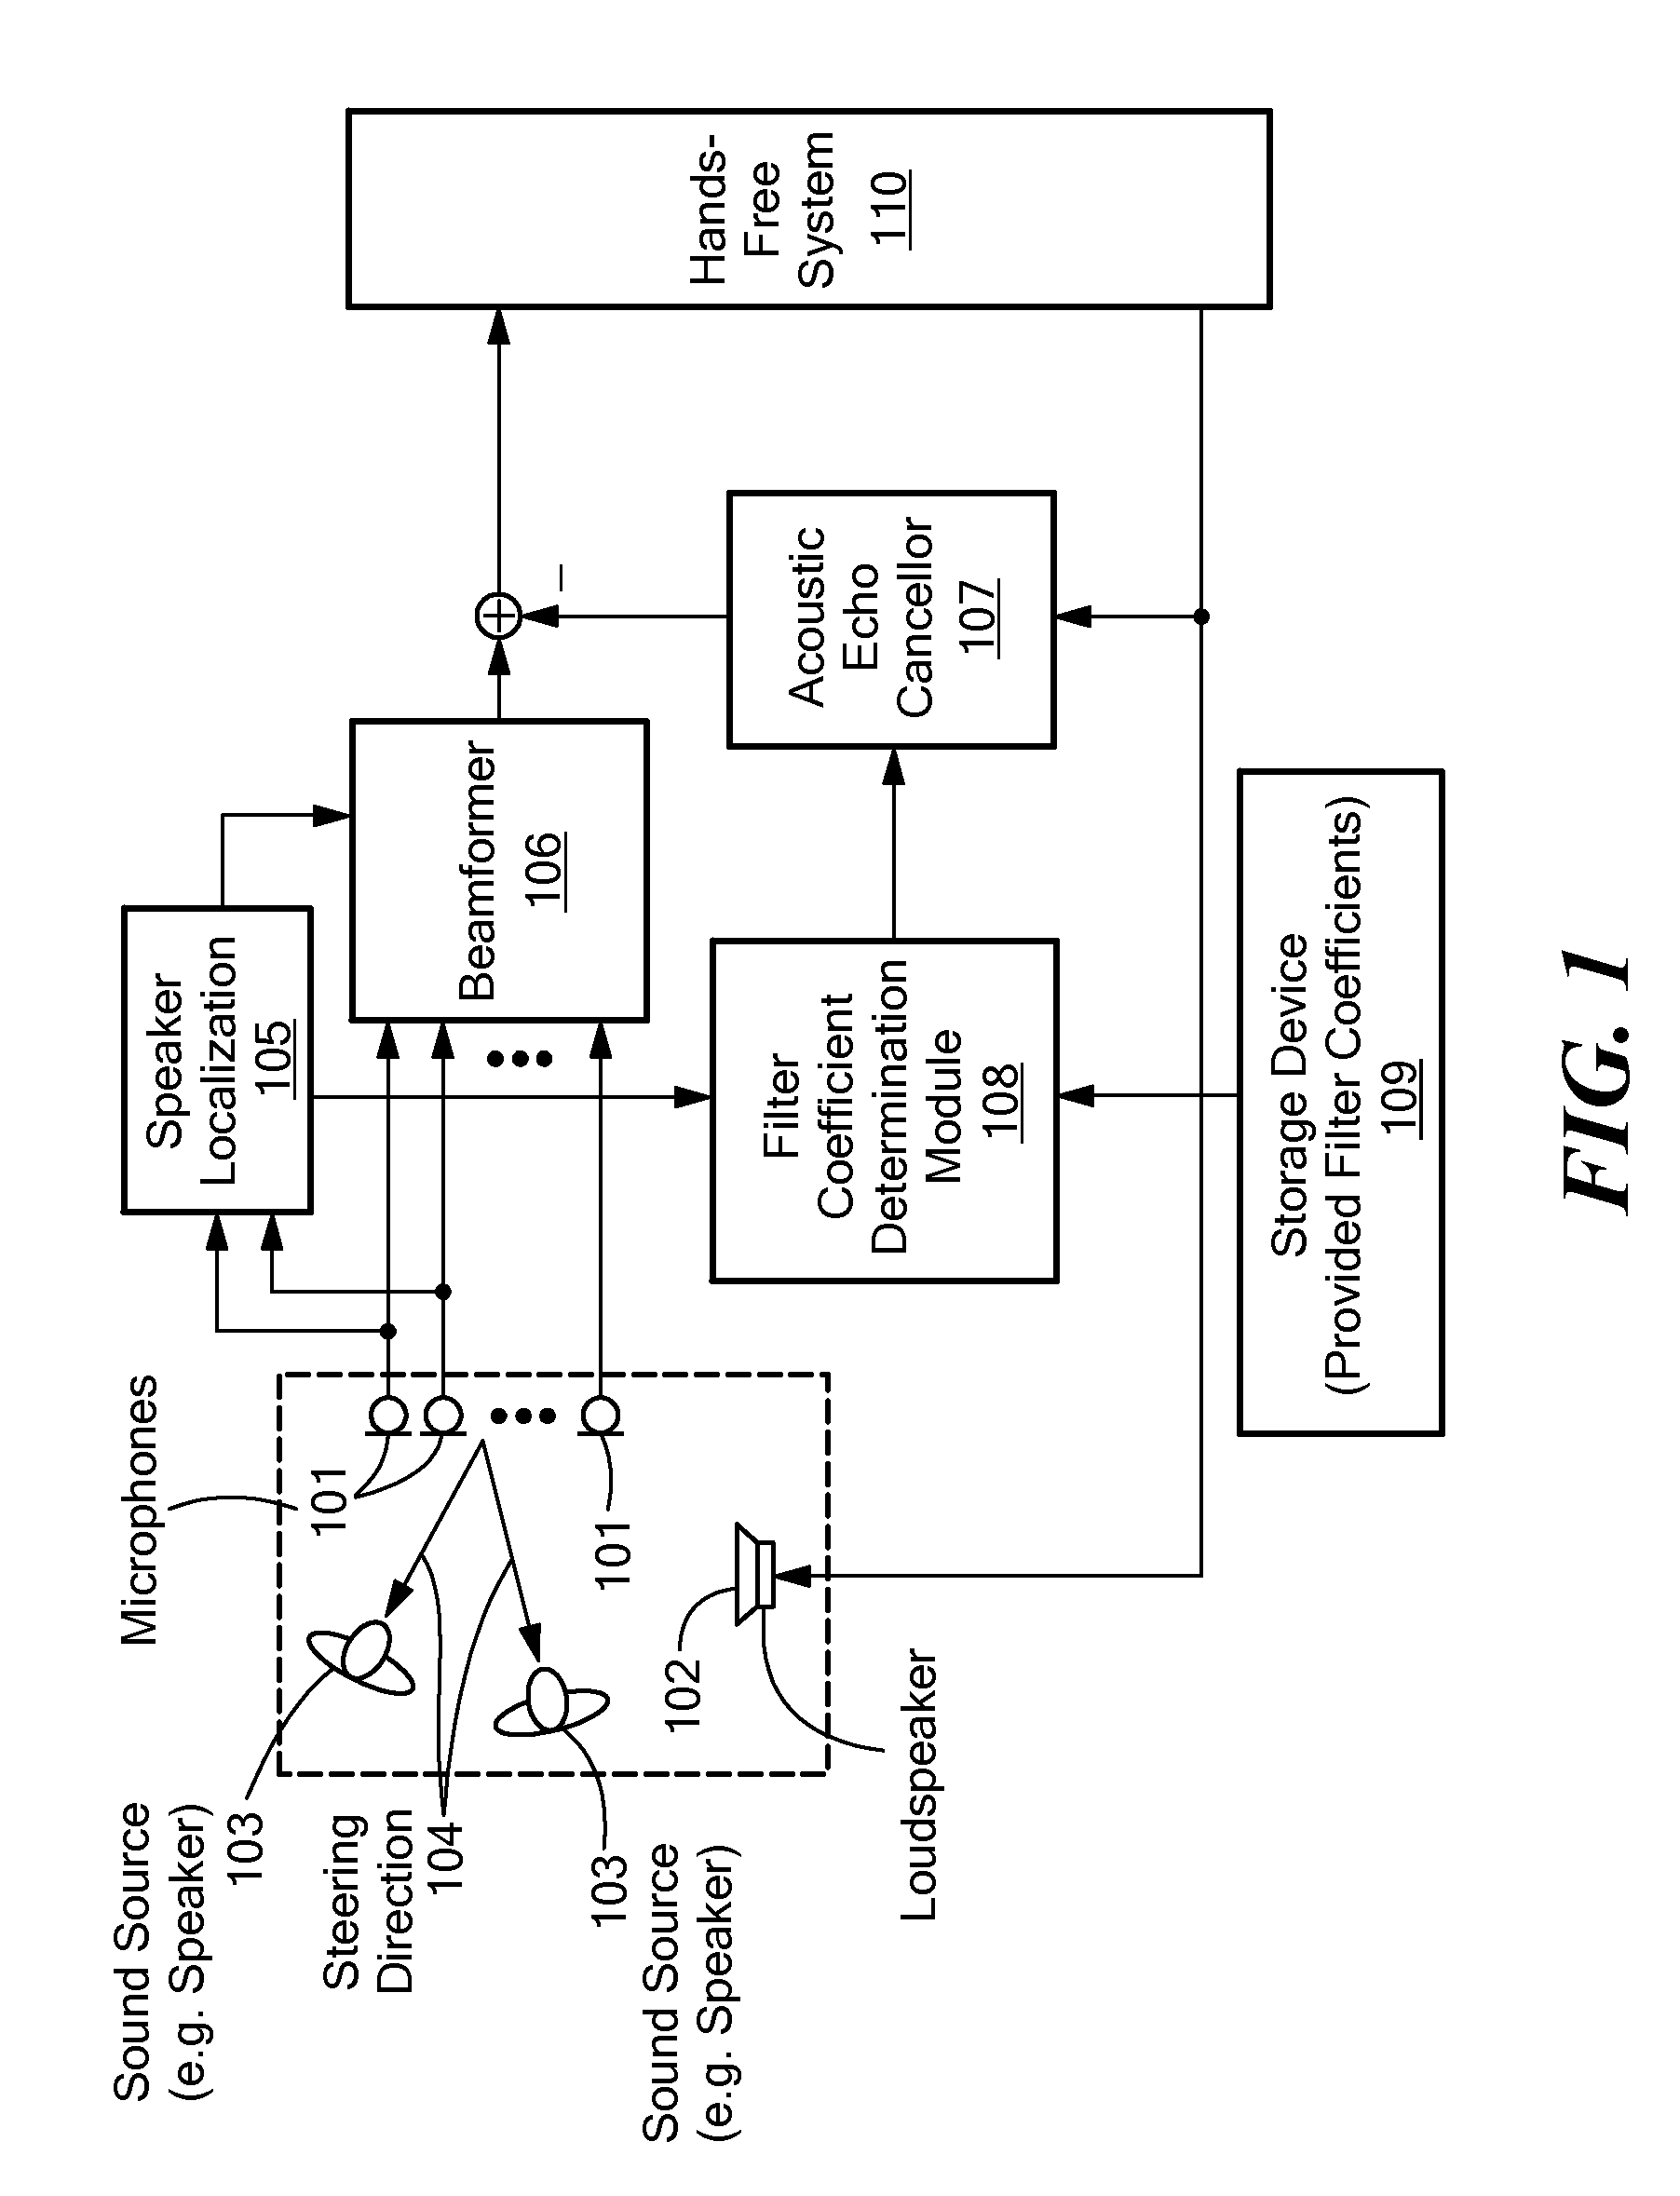 Method for Determining a Set of Filter Coefficients for an Acoustic Echo Compensator